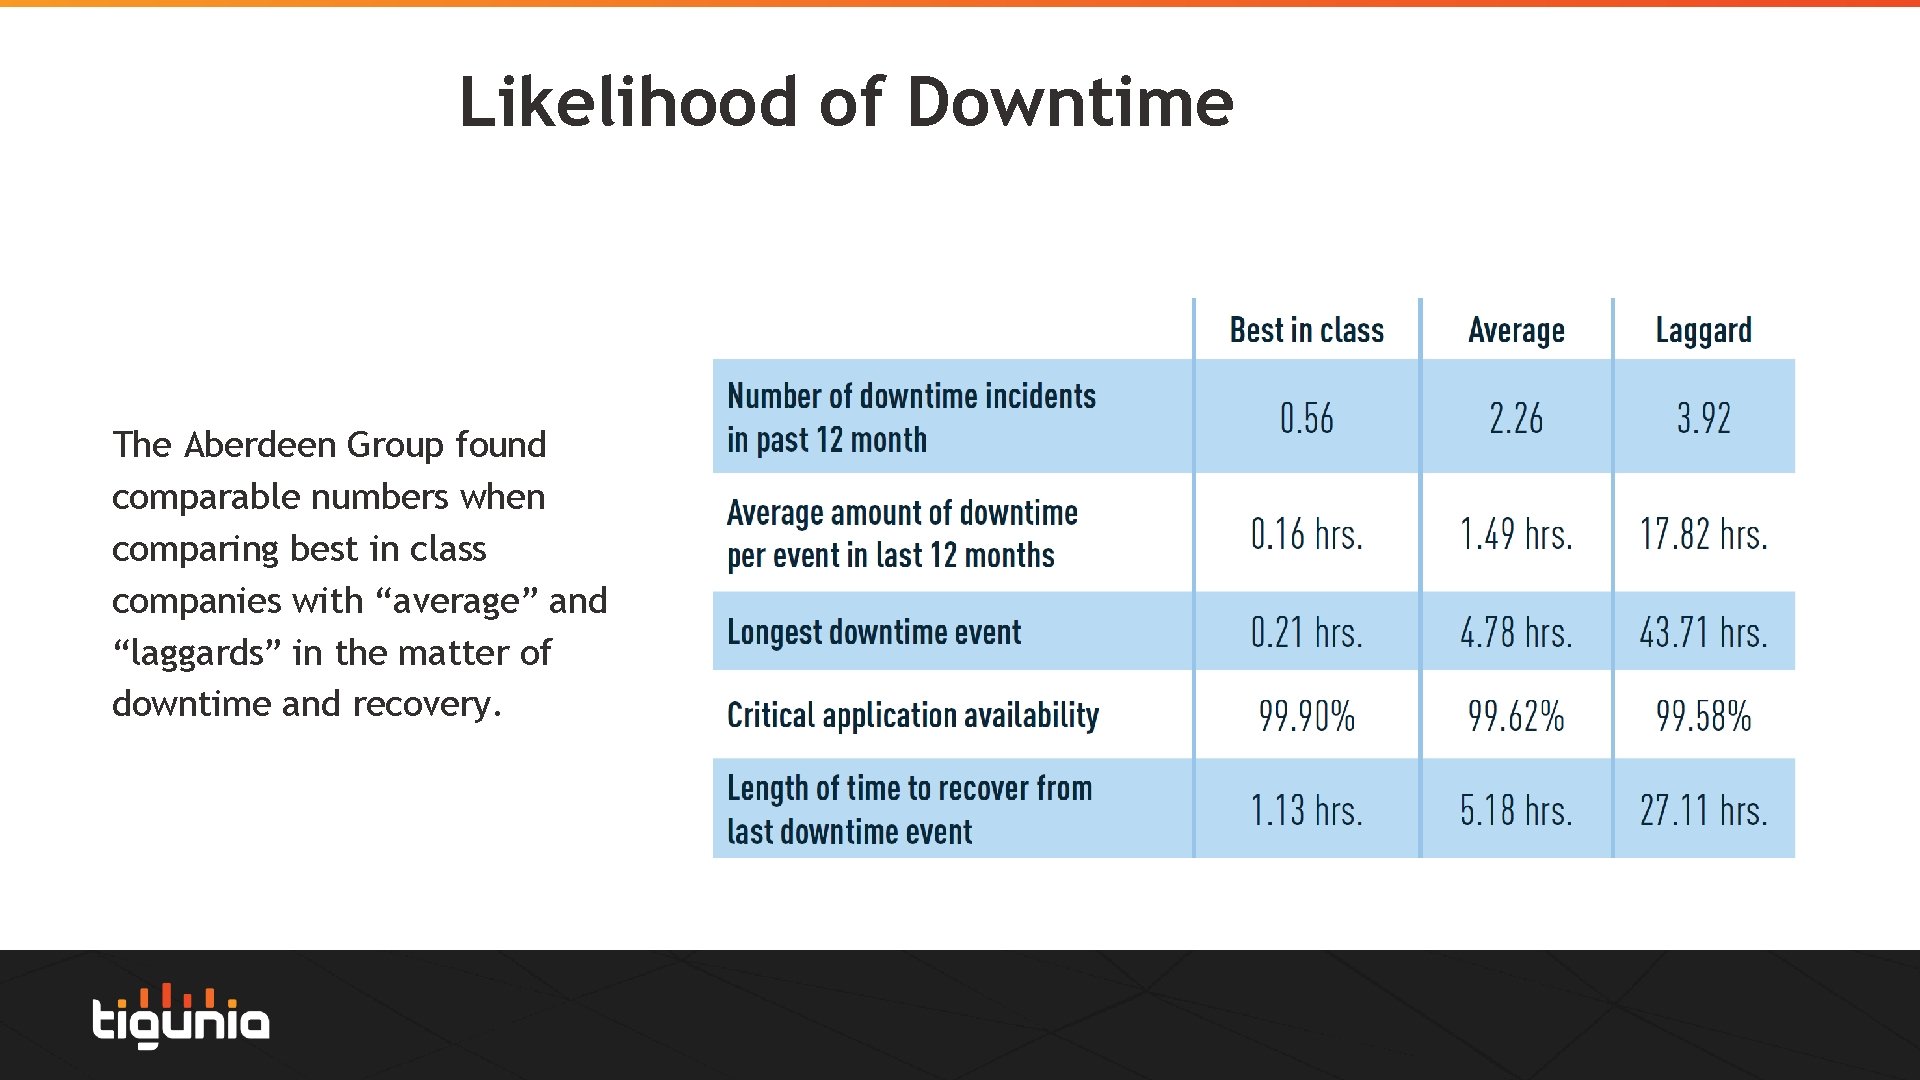 Likelihood of Downtime The Aberdeen Group found comparable numbers when comparing best in class